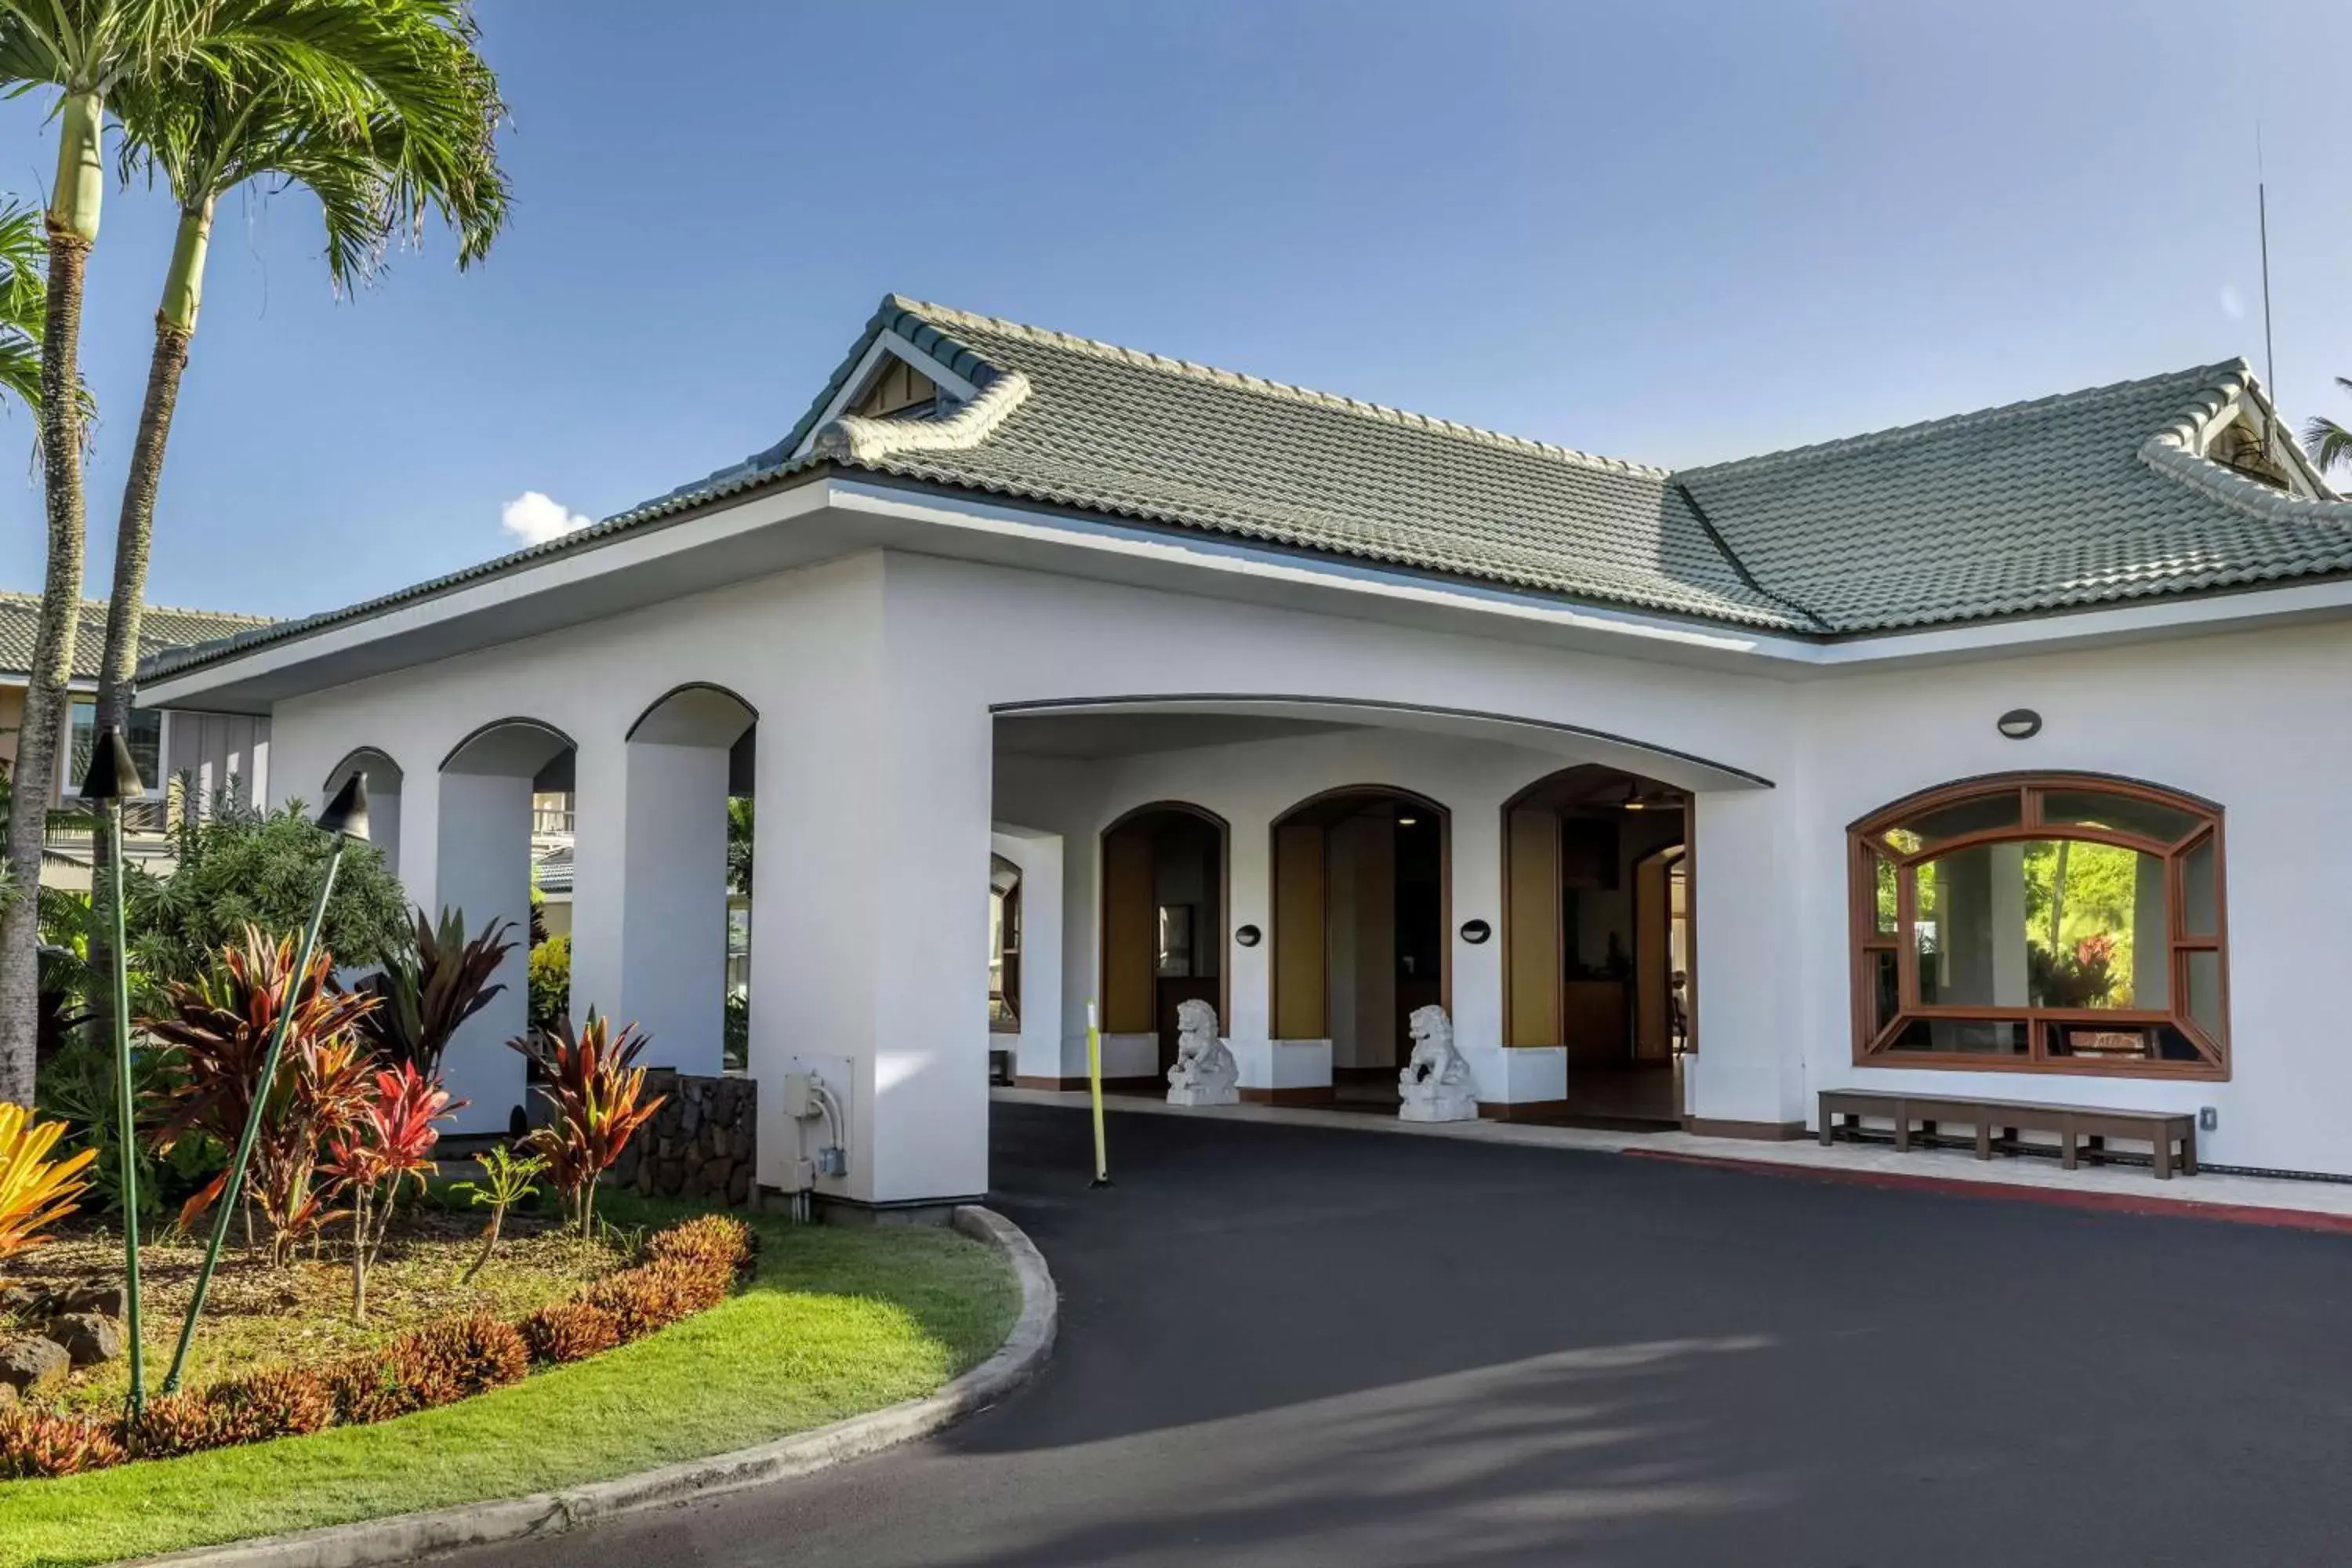 Property Building in Hilton Vacation Club The Point at Poipu Kauai